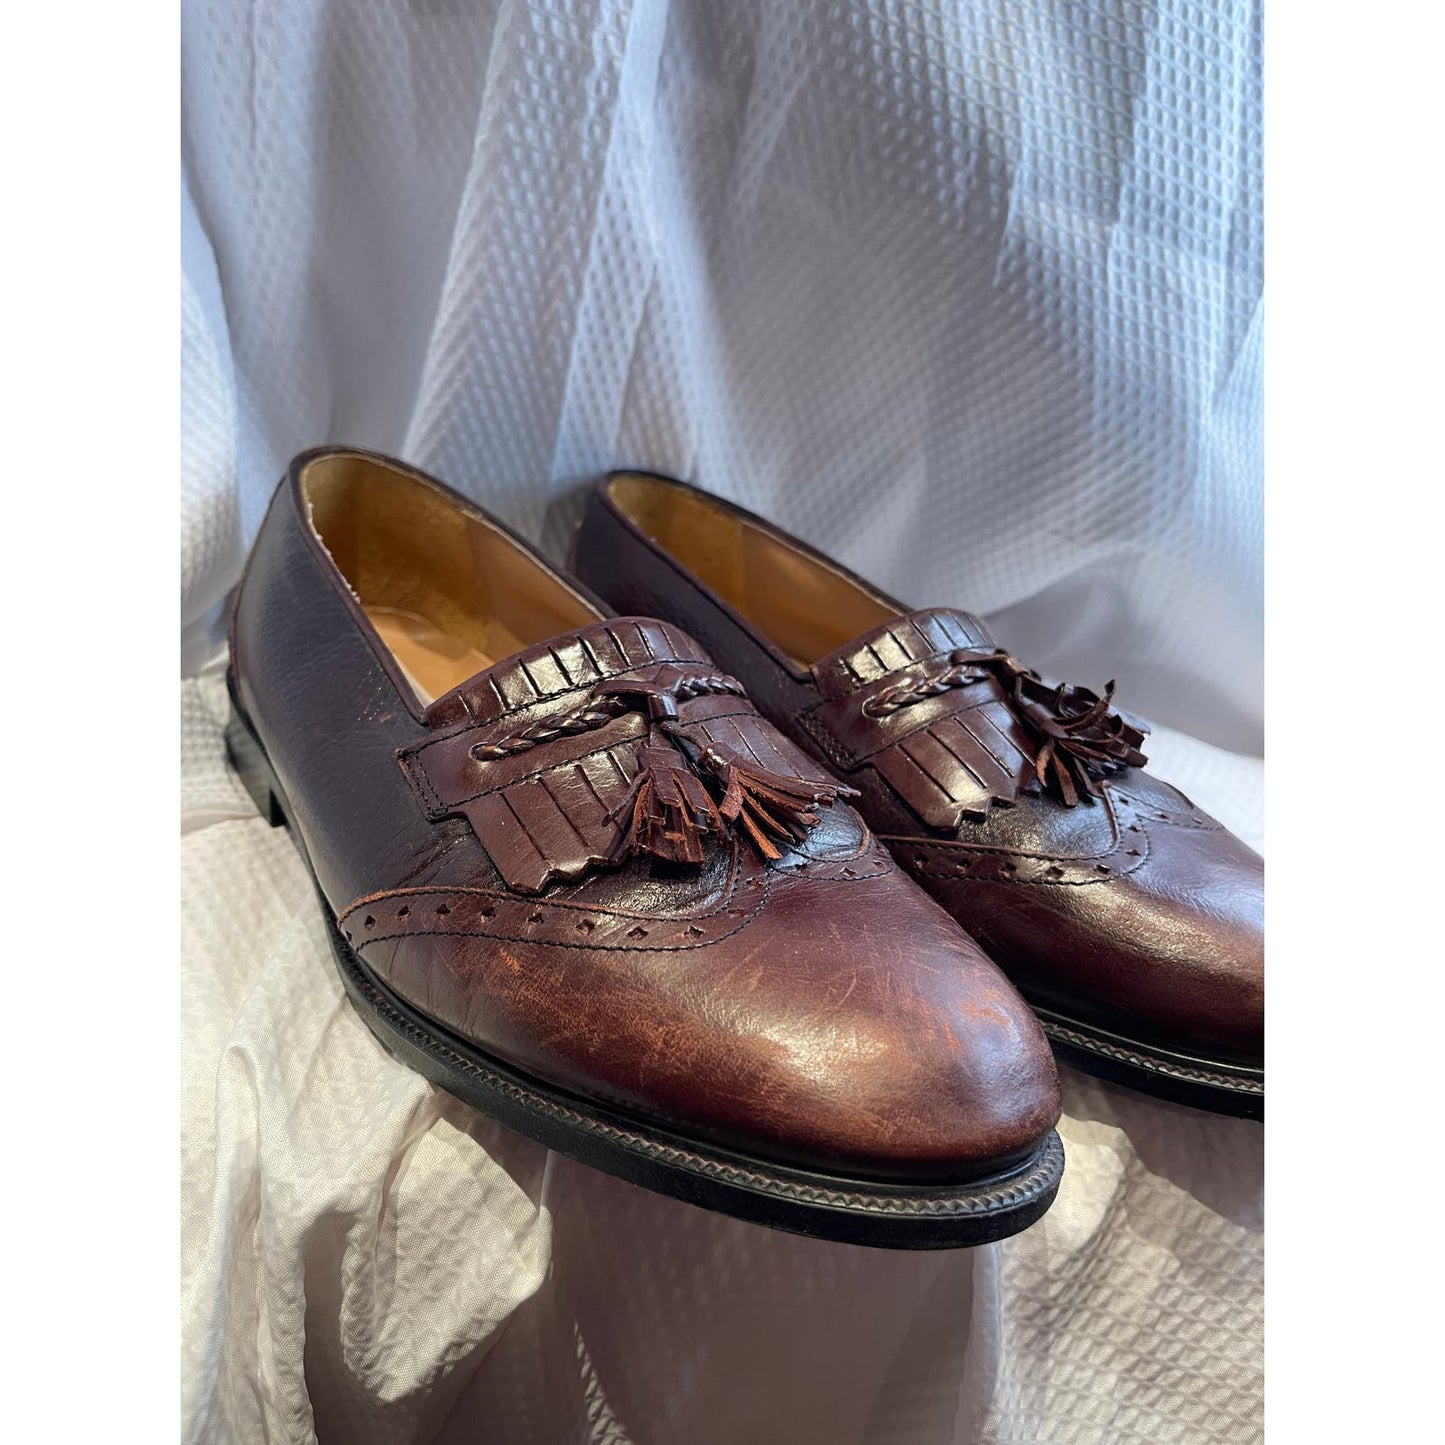 Stanley Blacker Brown Oxfords Men's Size 8.5 61606 Made in Italy